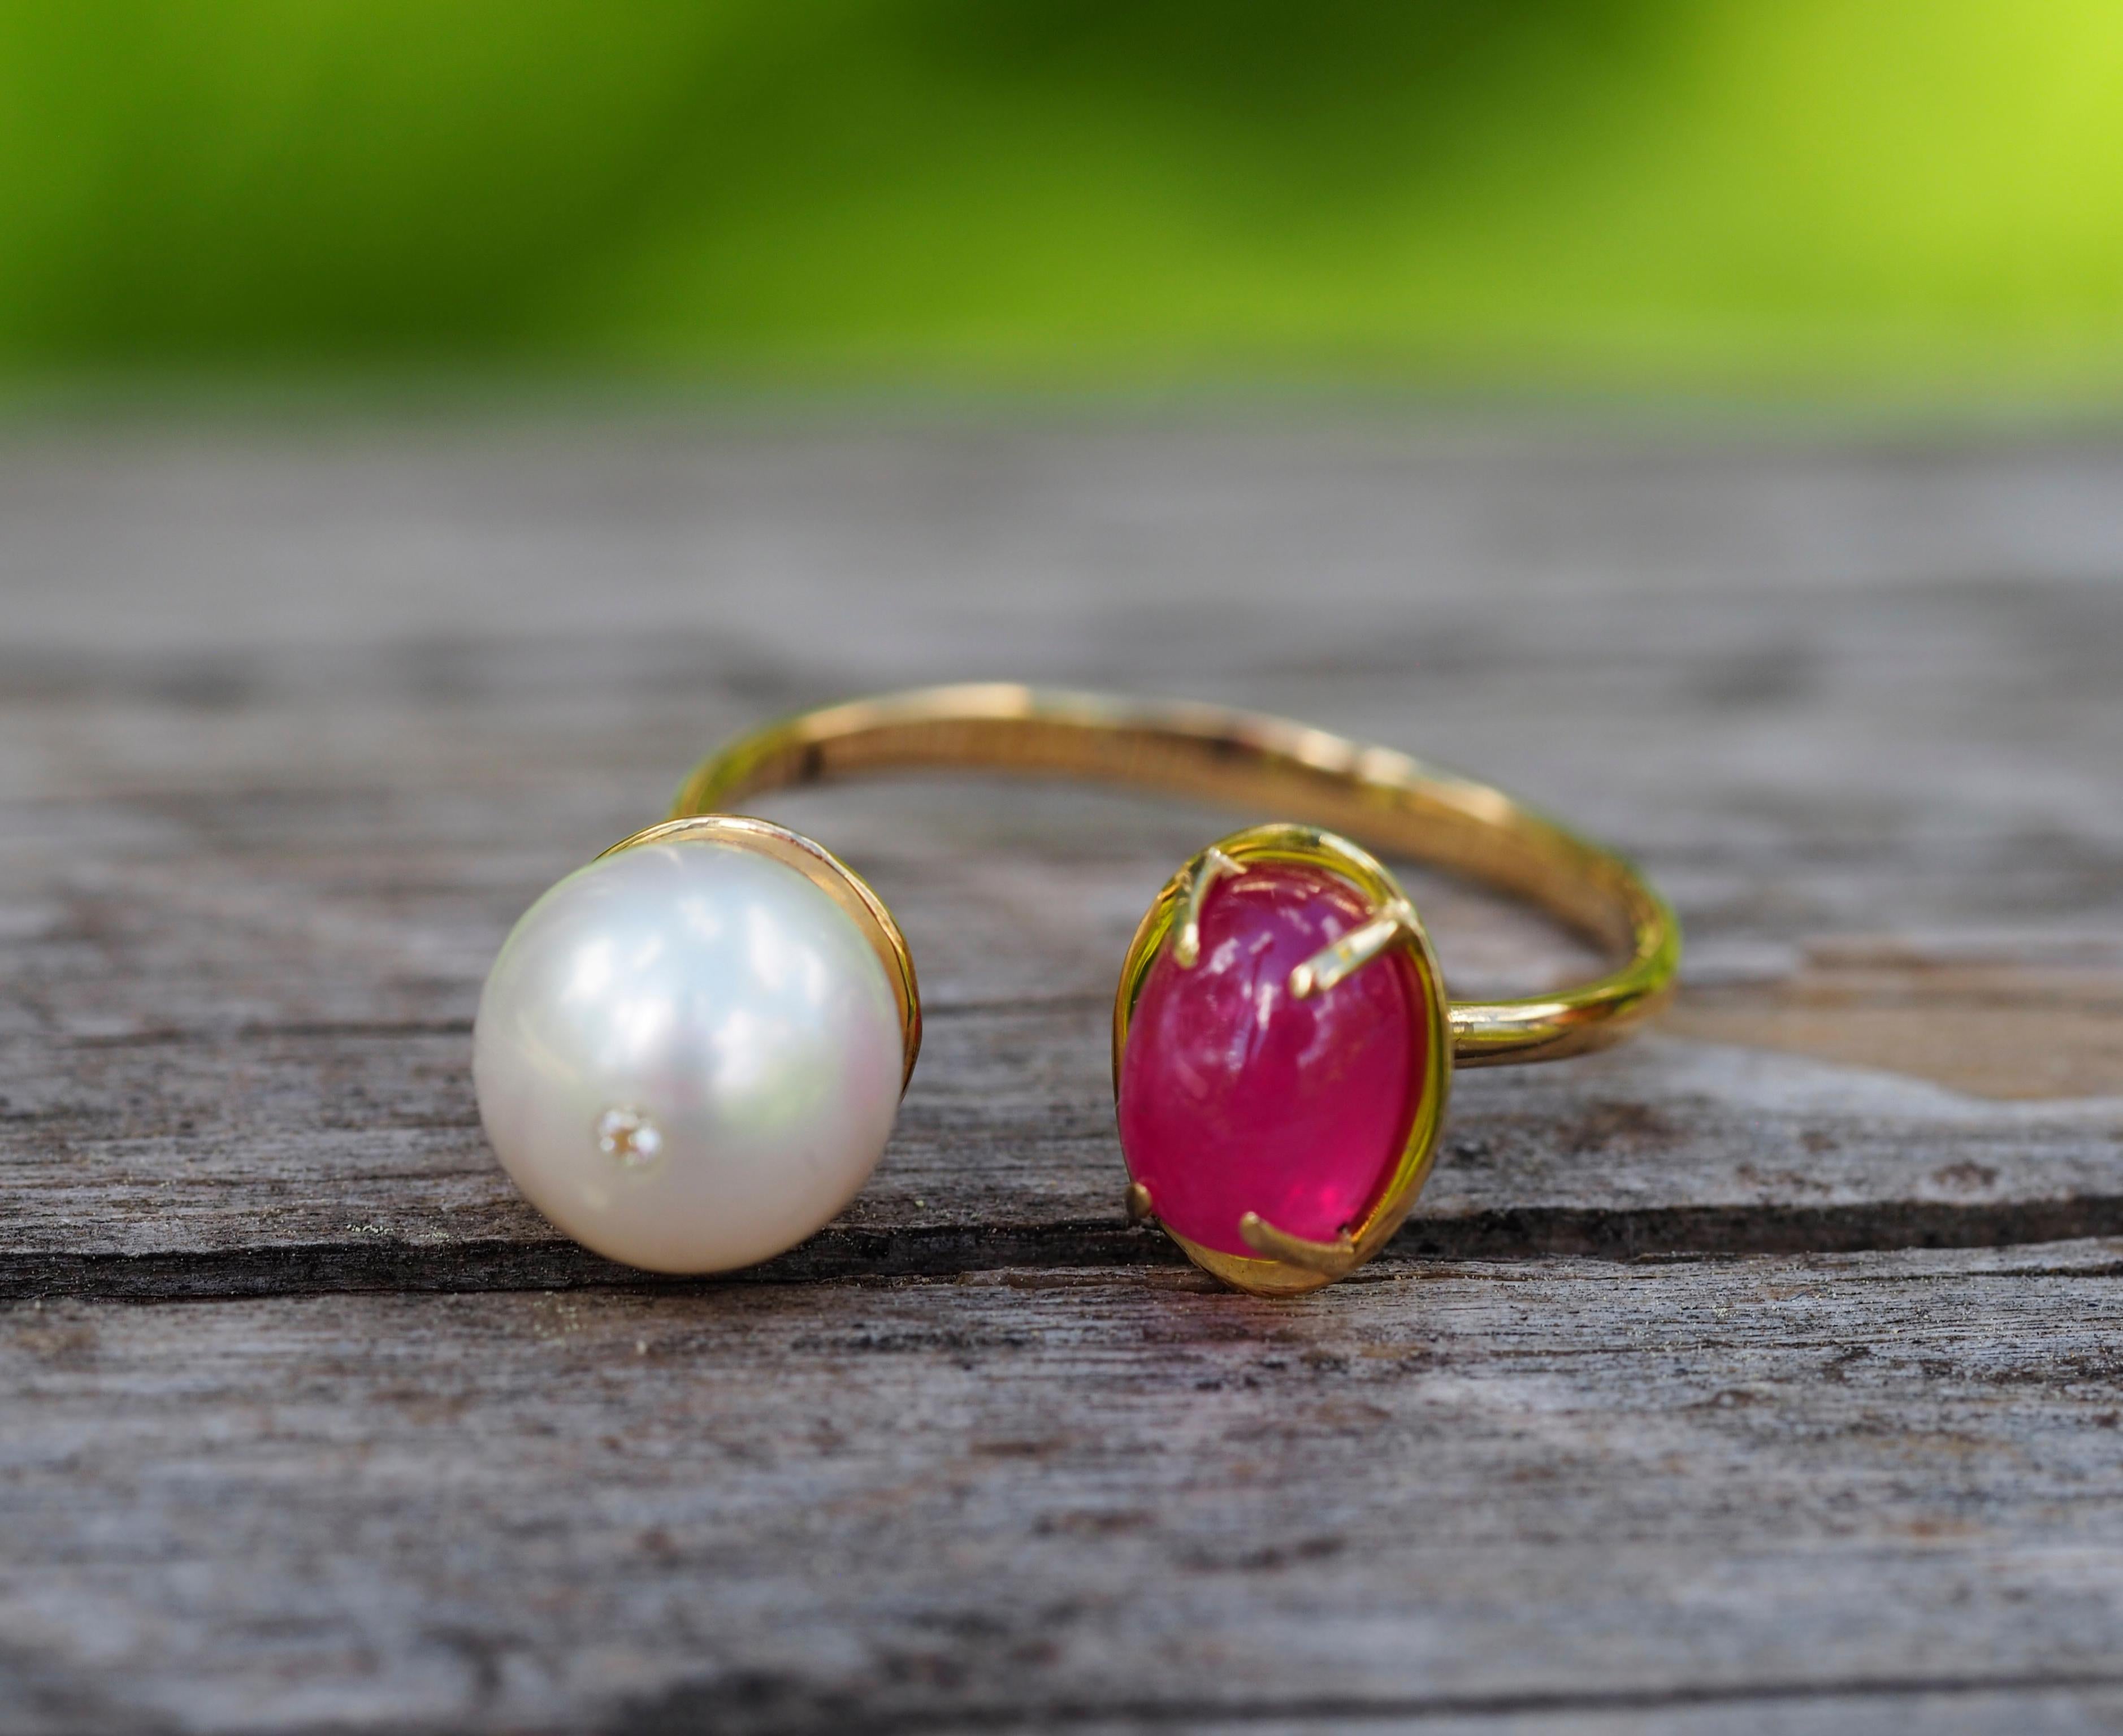 For Sale:  Oval cabochon ruby ring in 14 karat gold. Ruby and pearl ring 2